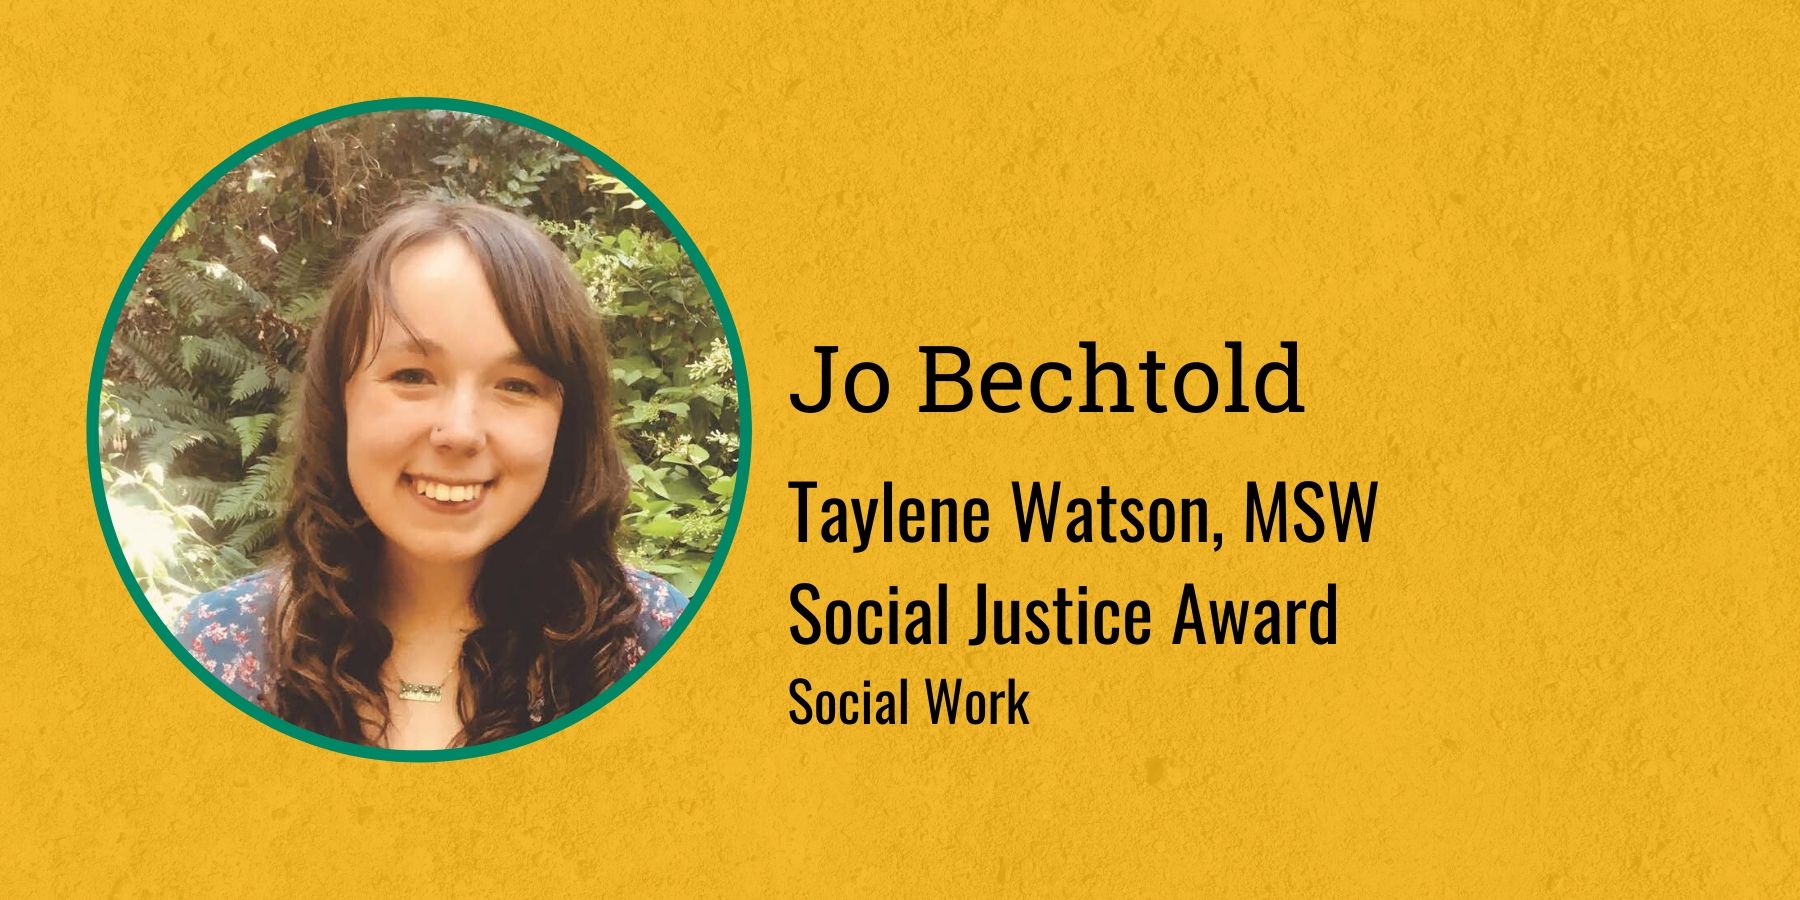 Photo of Jo Bechtold and Text Taylene Watson, MSW Social Justice Award, Social Work